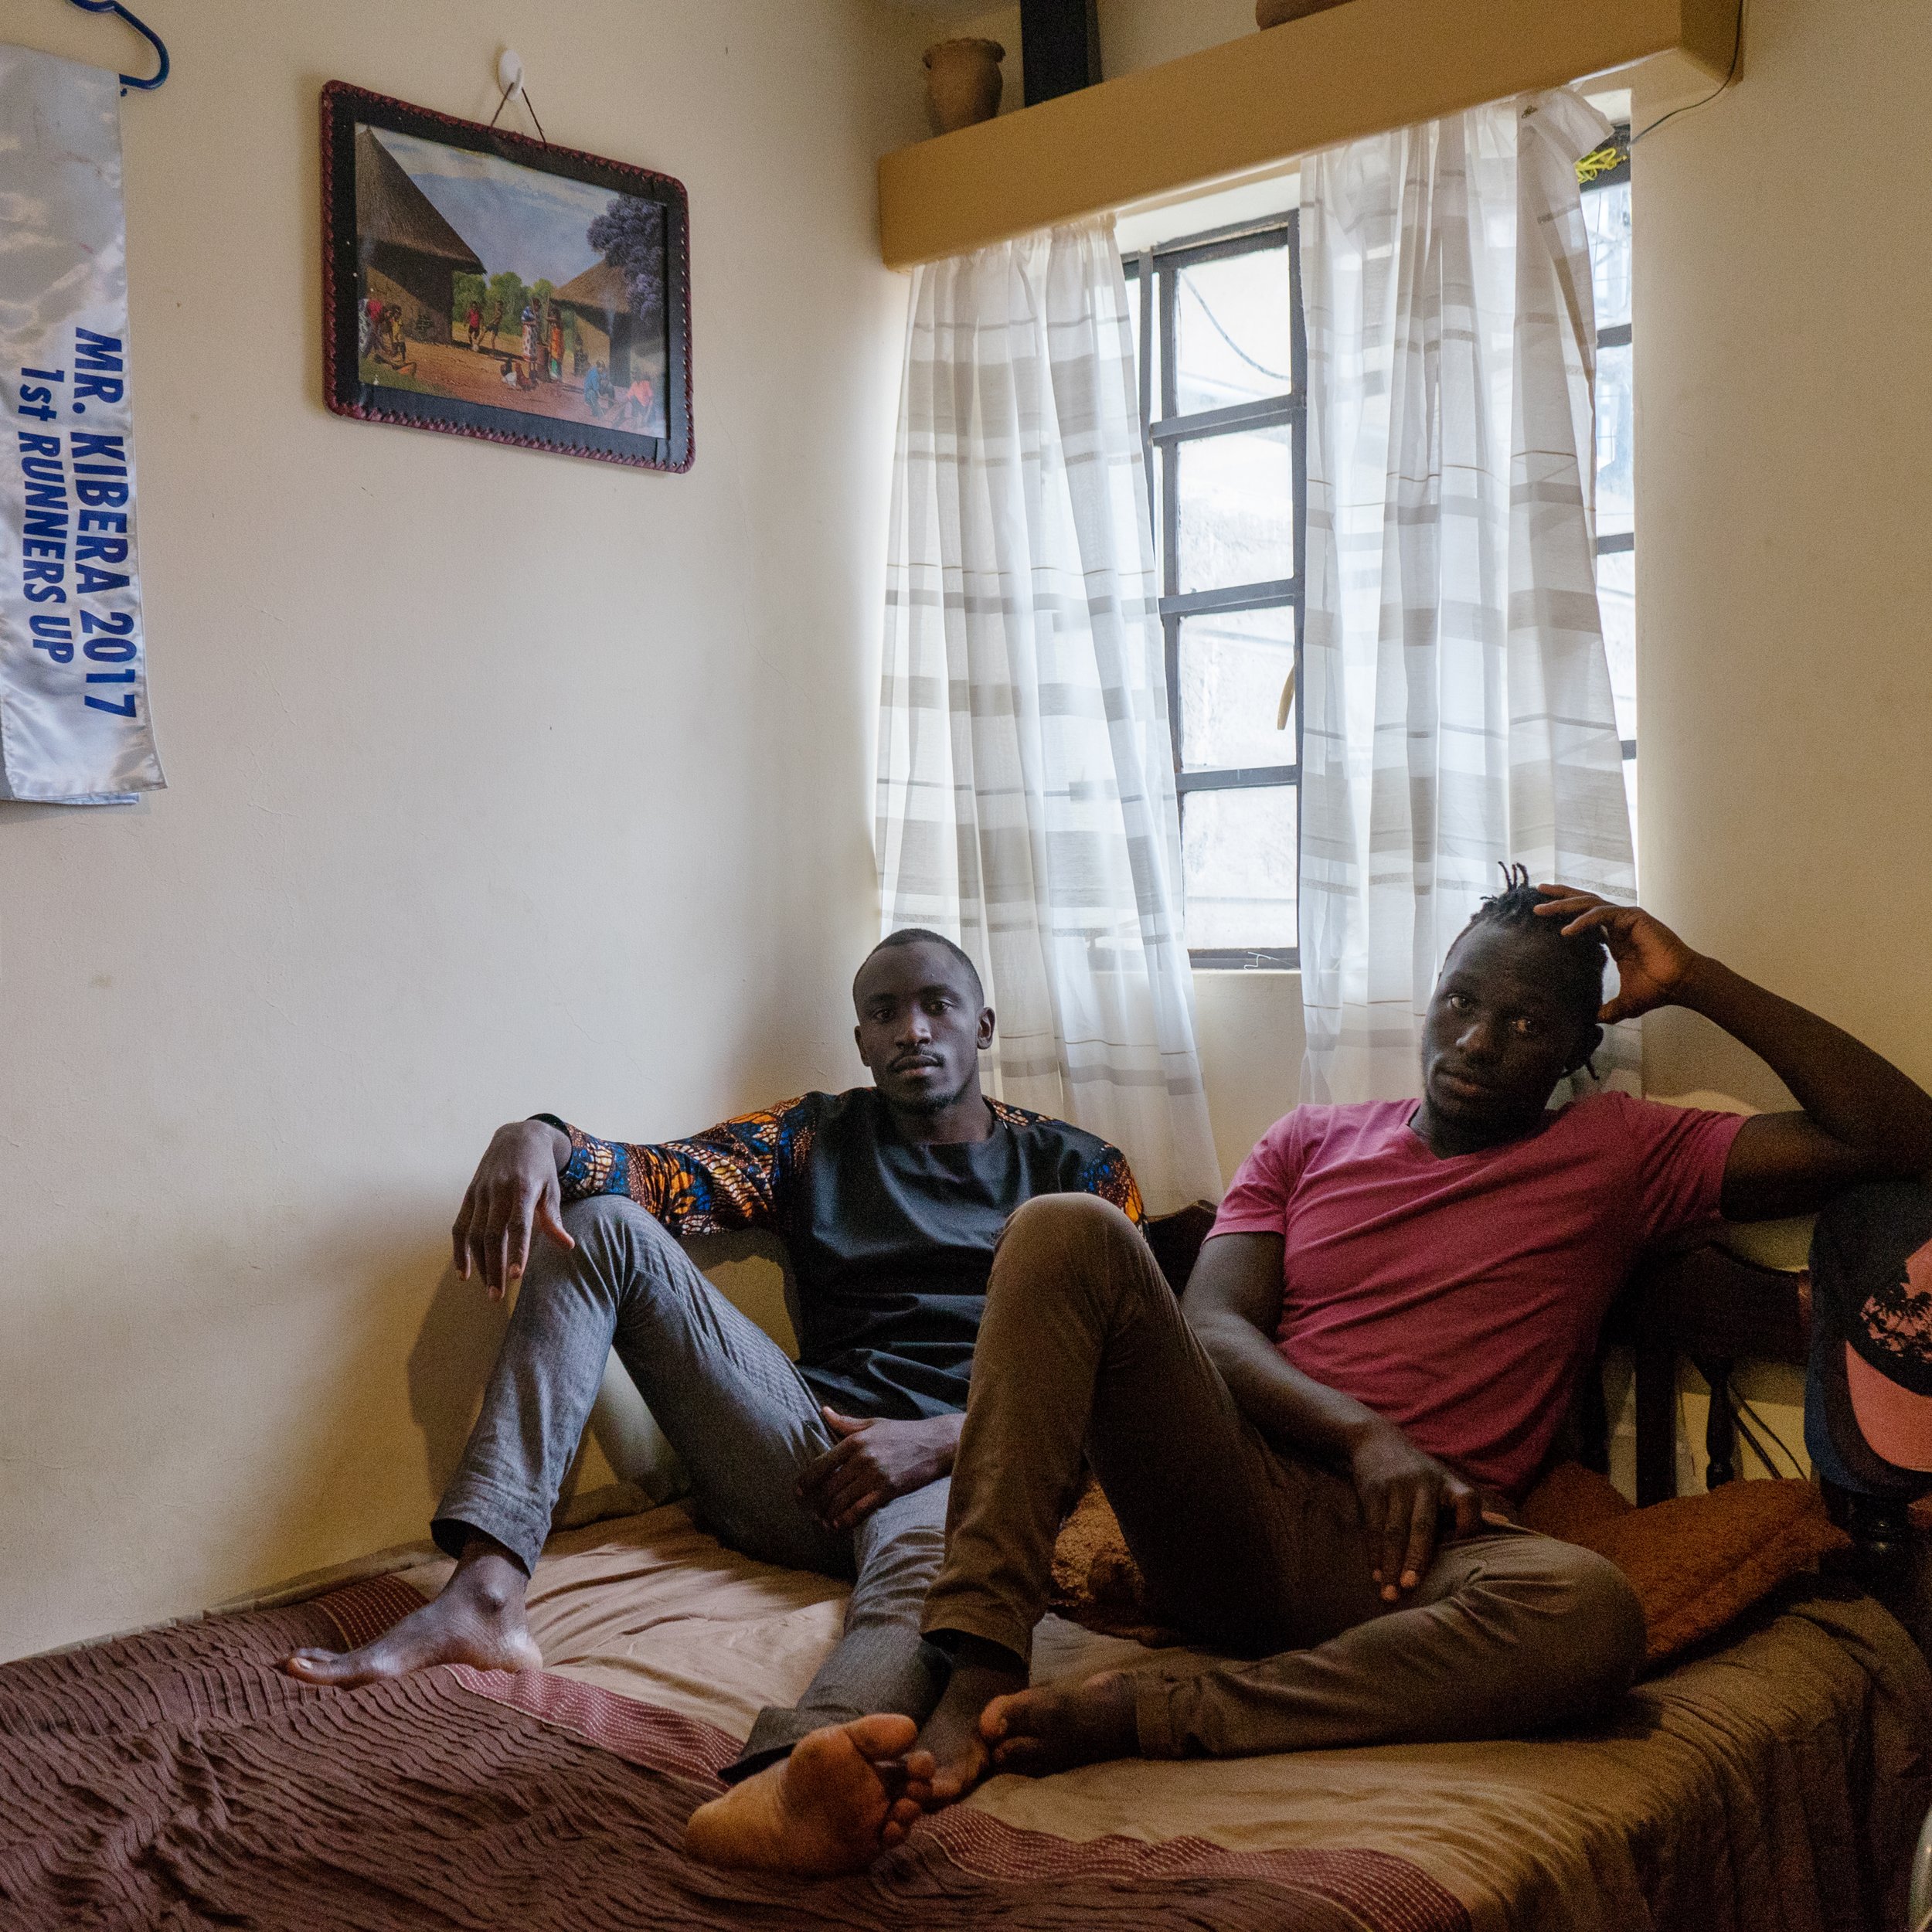  Collince Onyango, 27, left, and his brother, Raphael Oduor, 24, both university students, in the home they rent from a resident who received housing built under the Kenya Slum Upgrading Program. Kibera, Nairobi, Nairobi County, Kenya. Photographed M